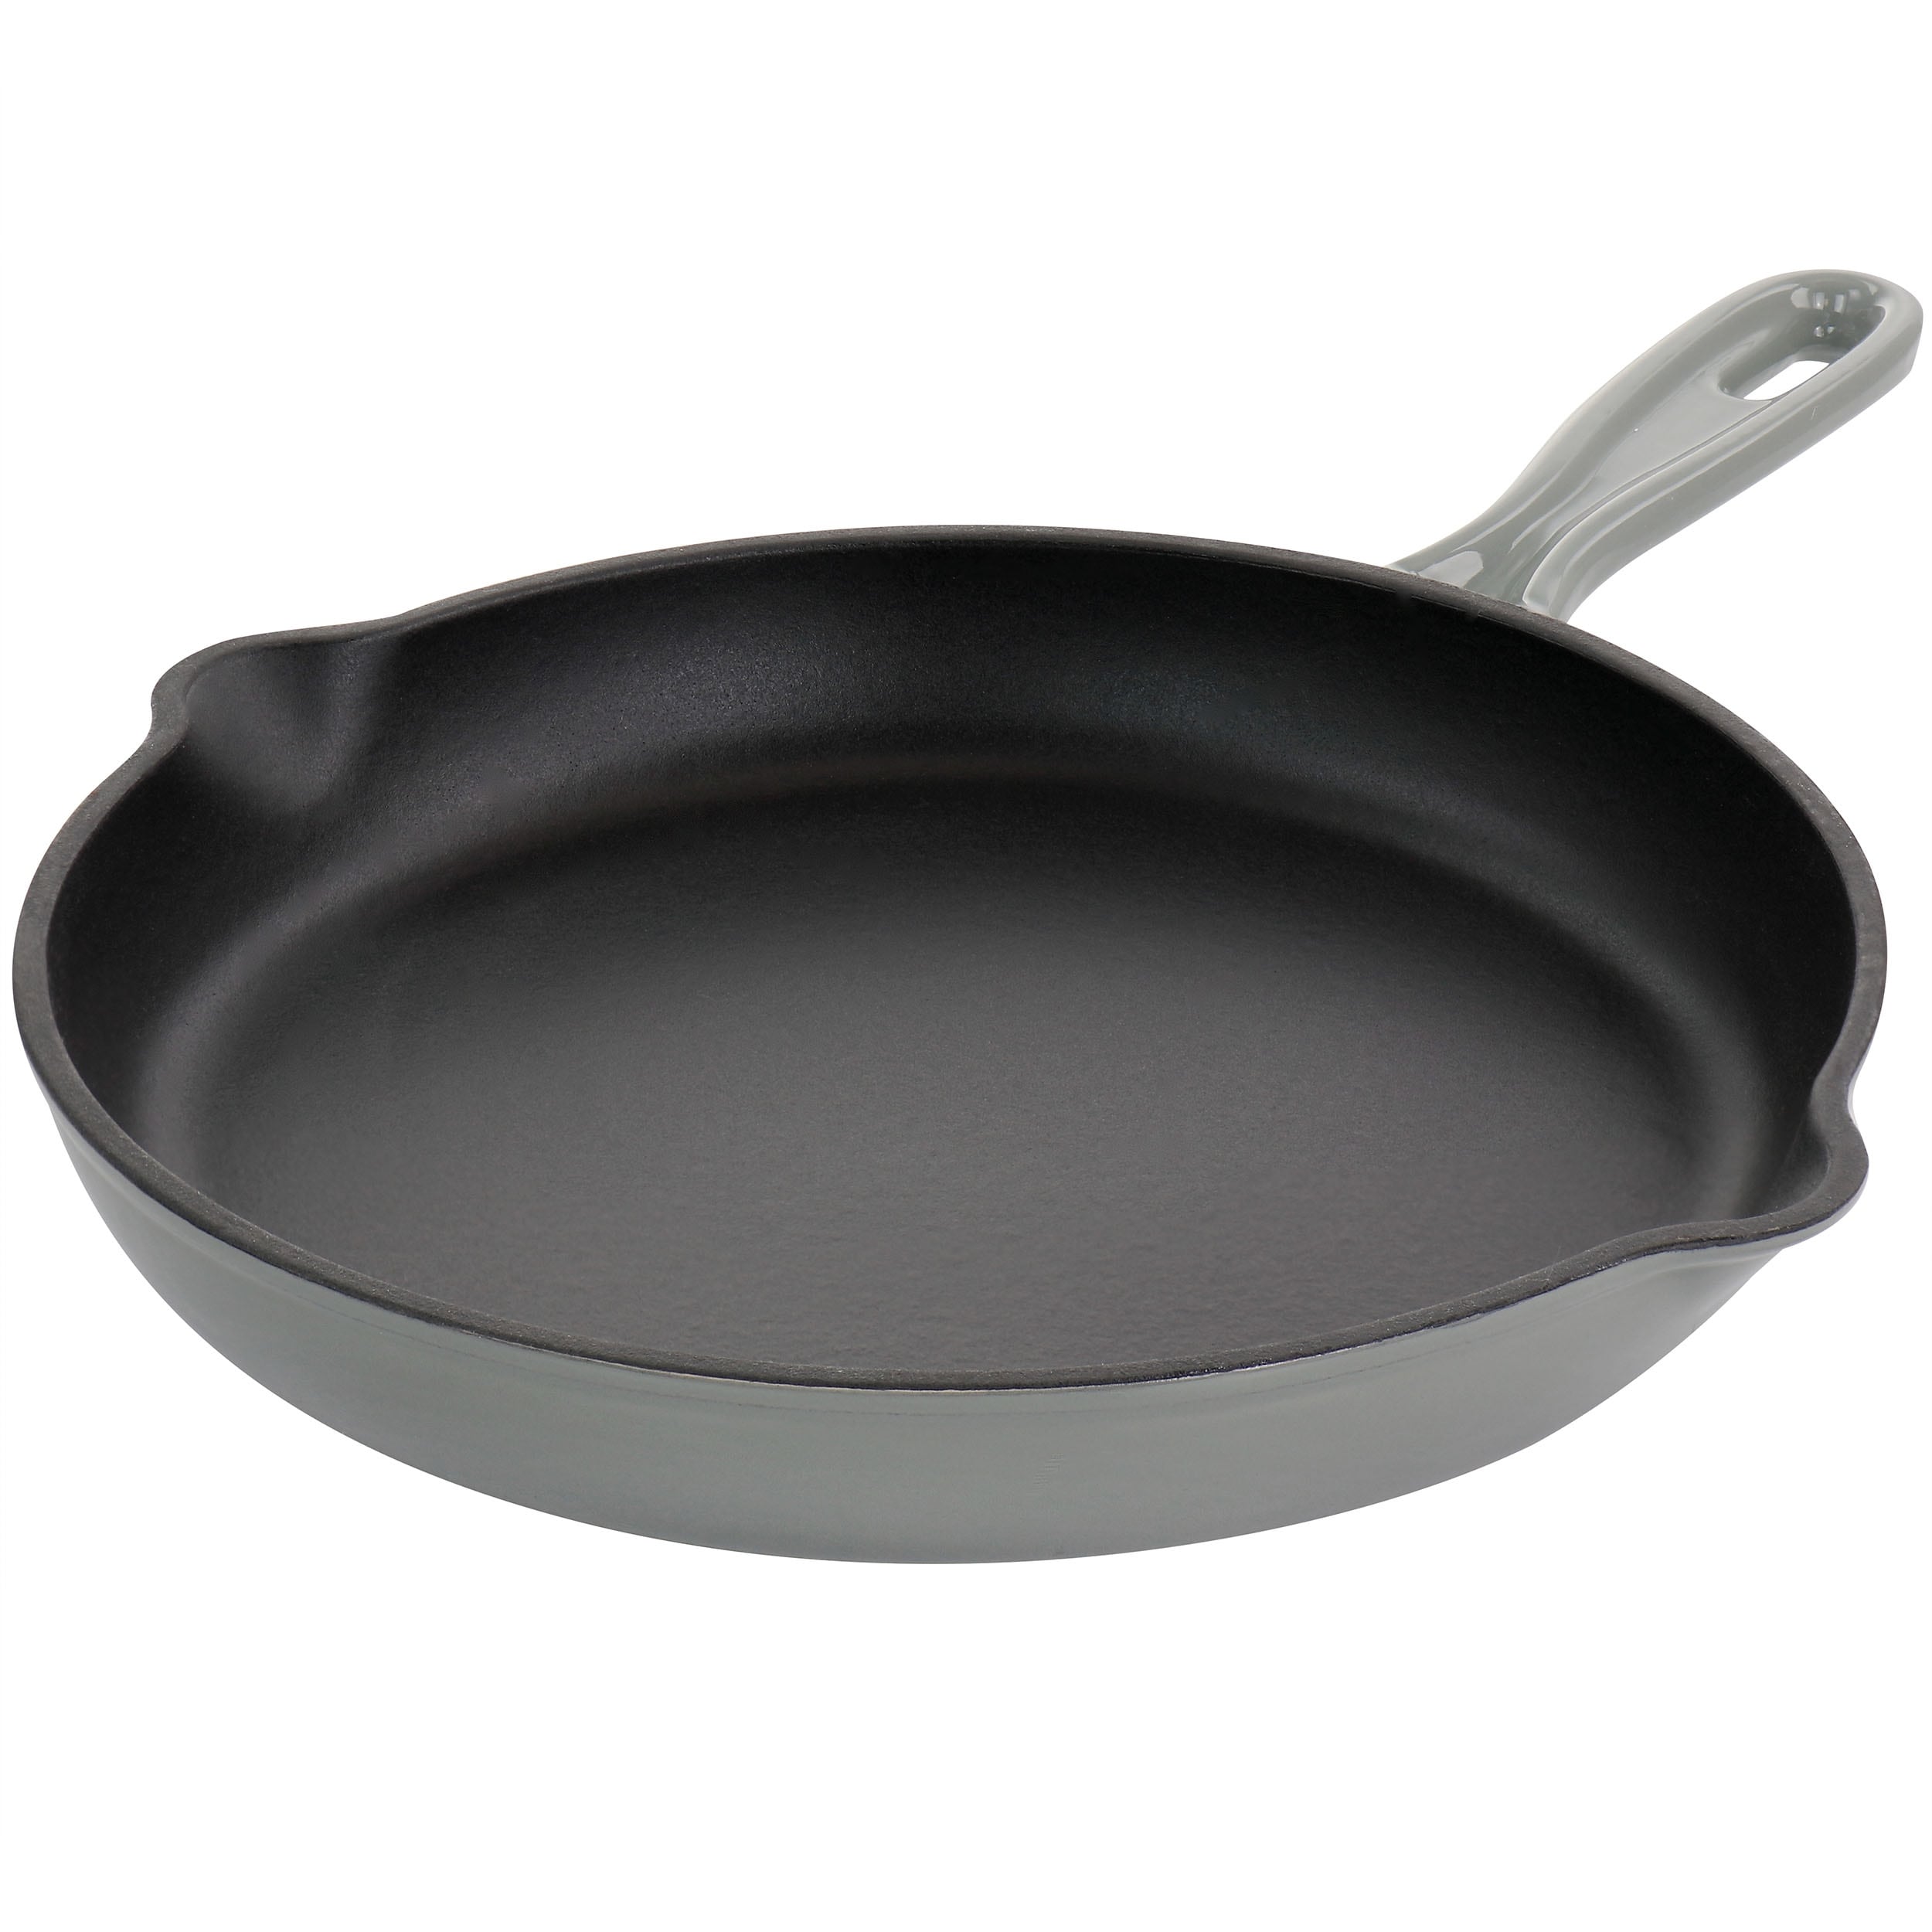 Round 10.25 Inch Enameled Cast Iron Skillet in Gray 10.25